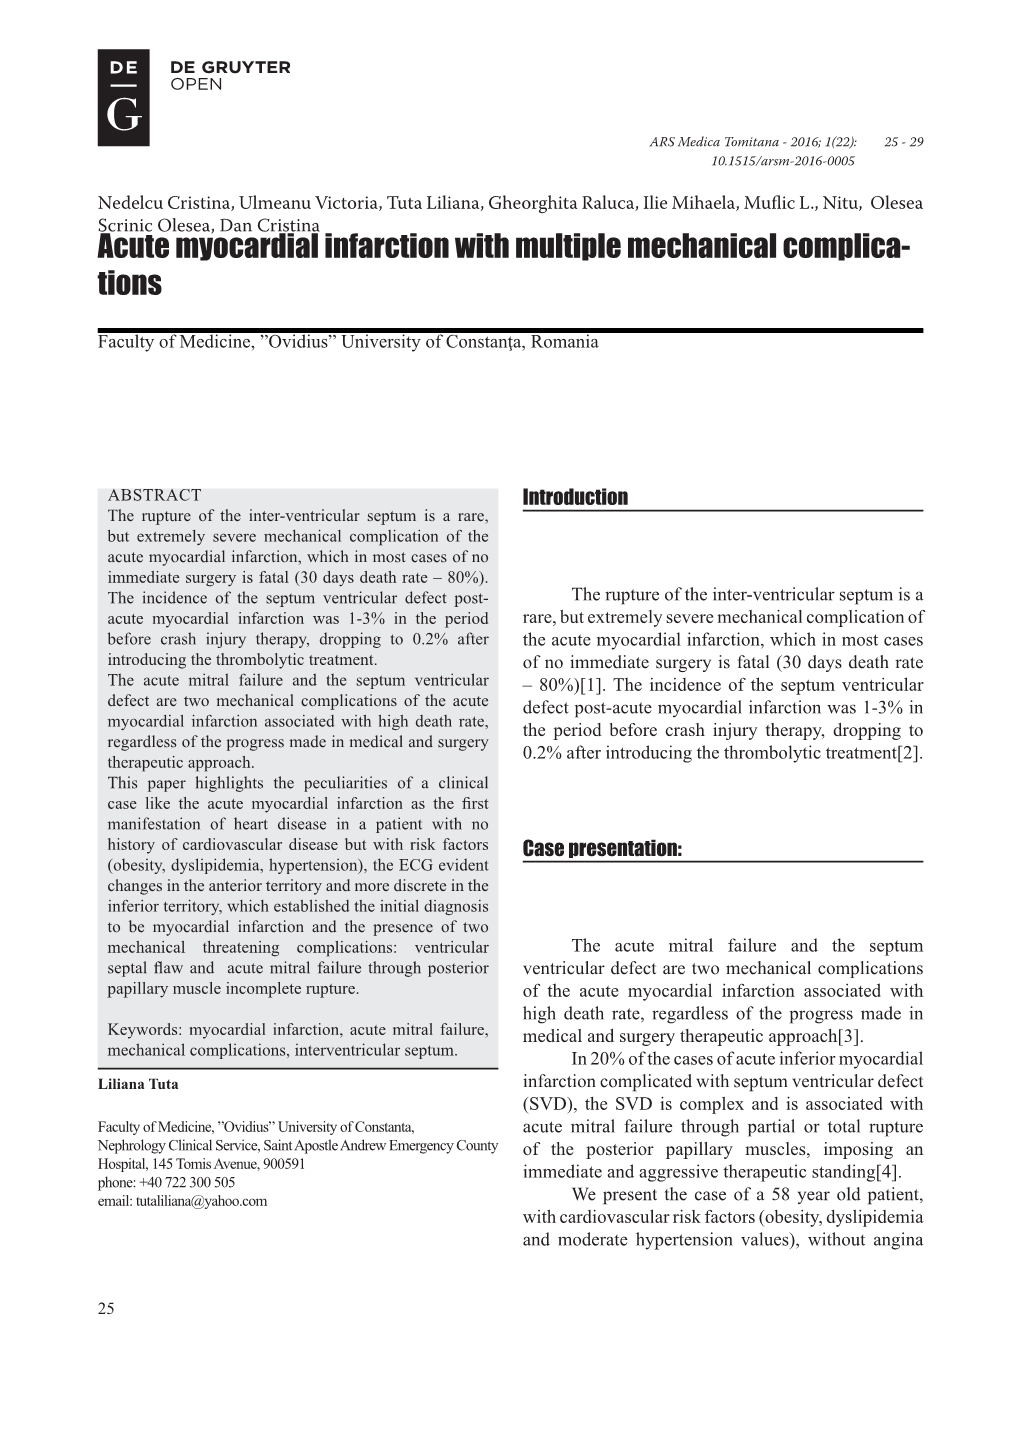 Acute Myocardial Infarction with Multiple Mechanical Complica- Tions